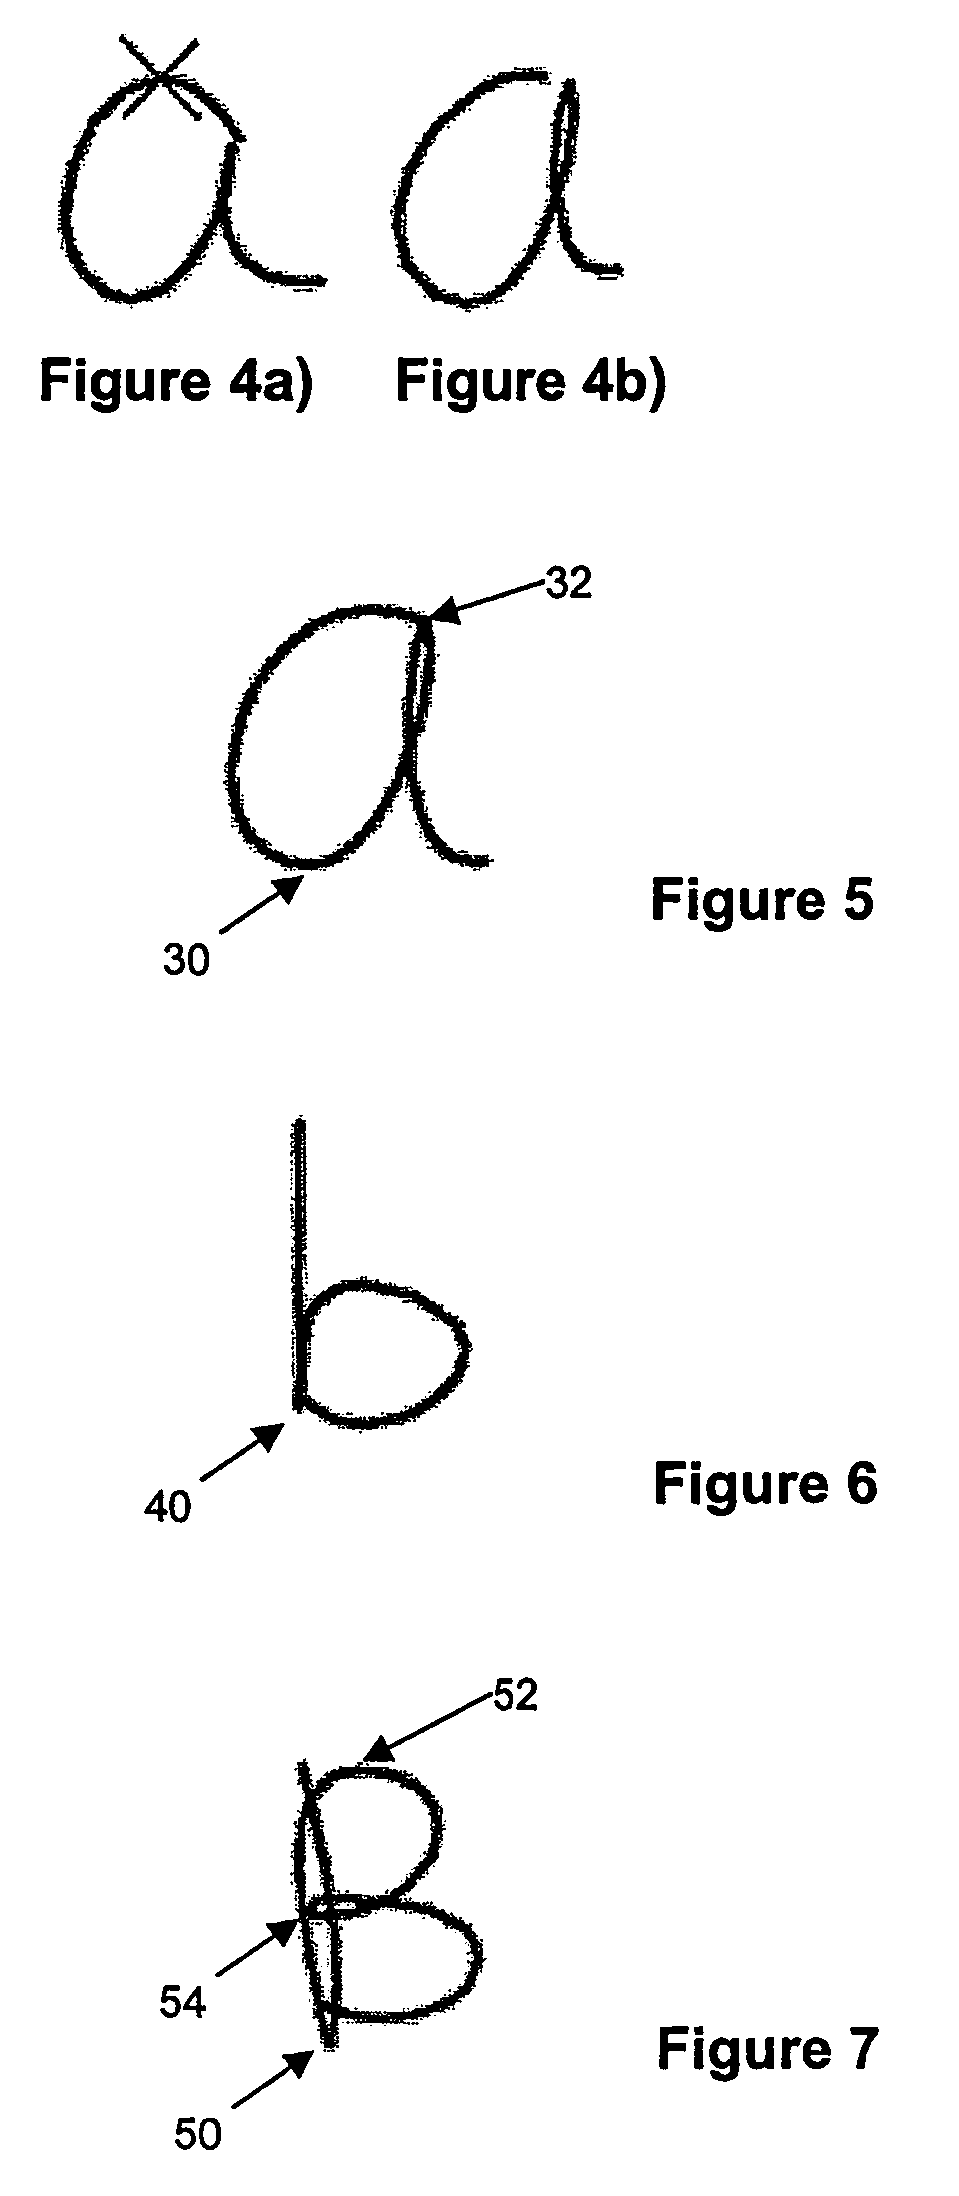 Method and apparatus for decoding handwritten characters